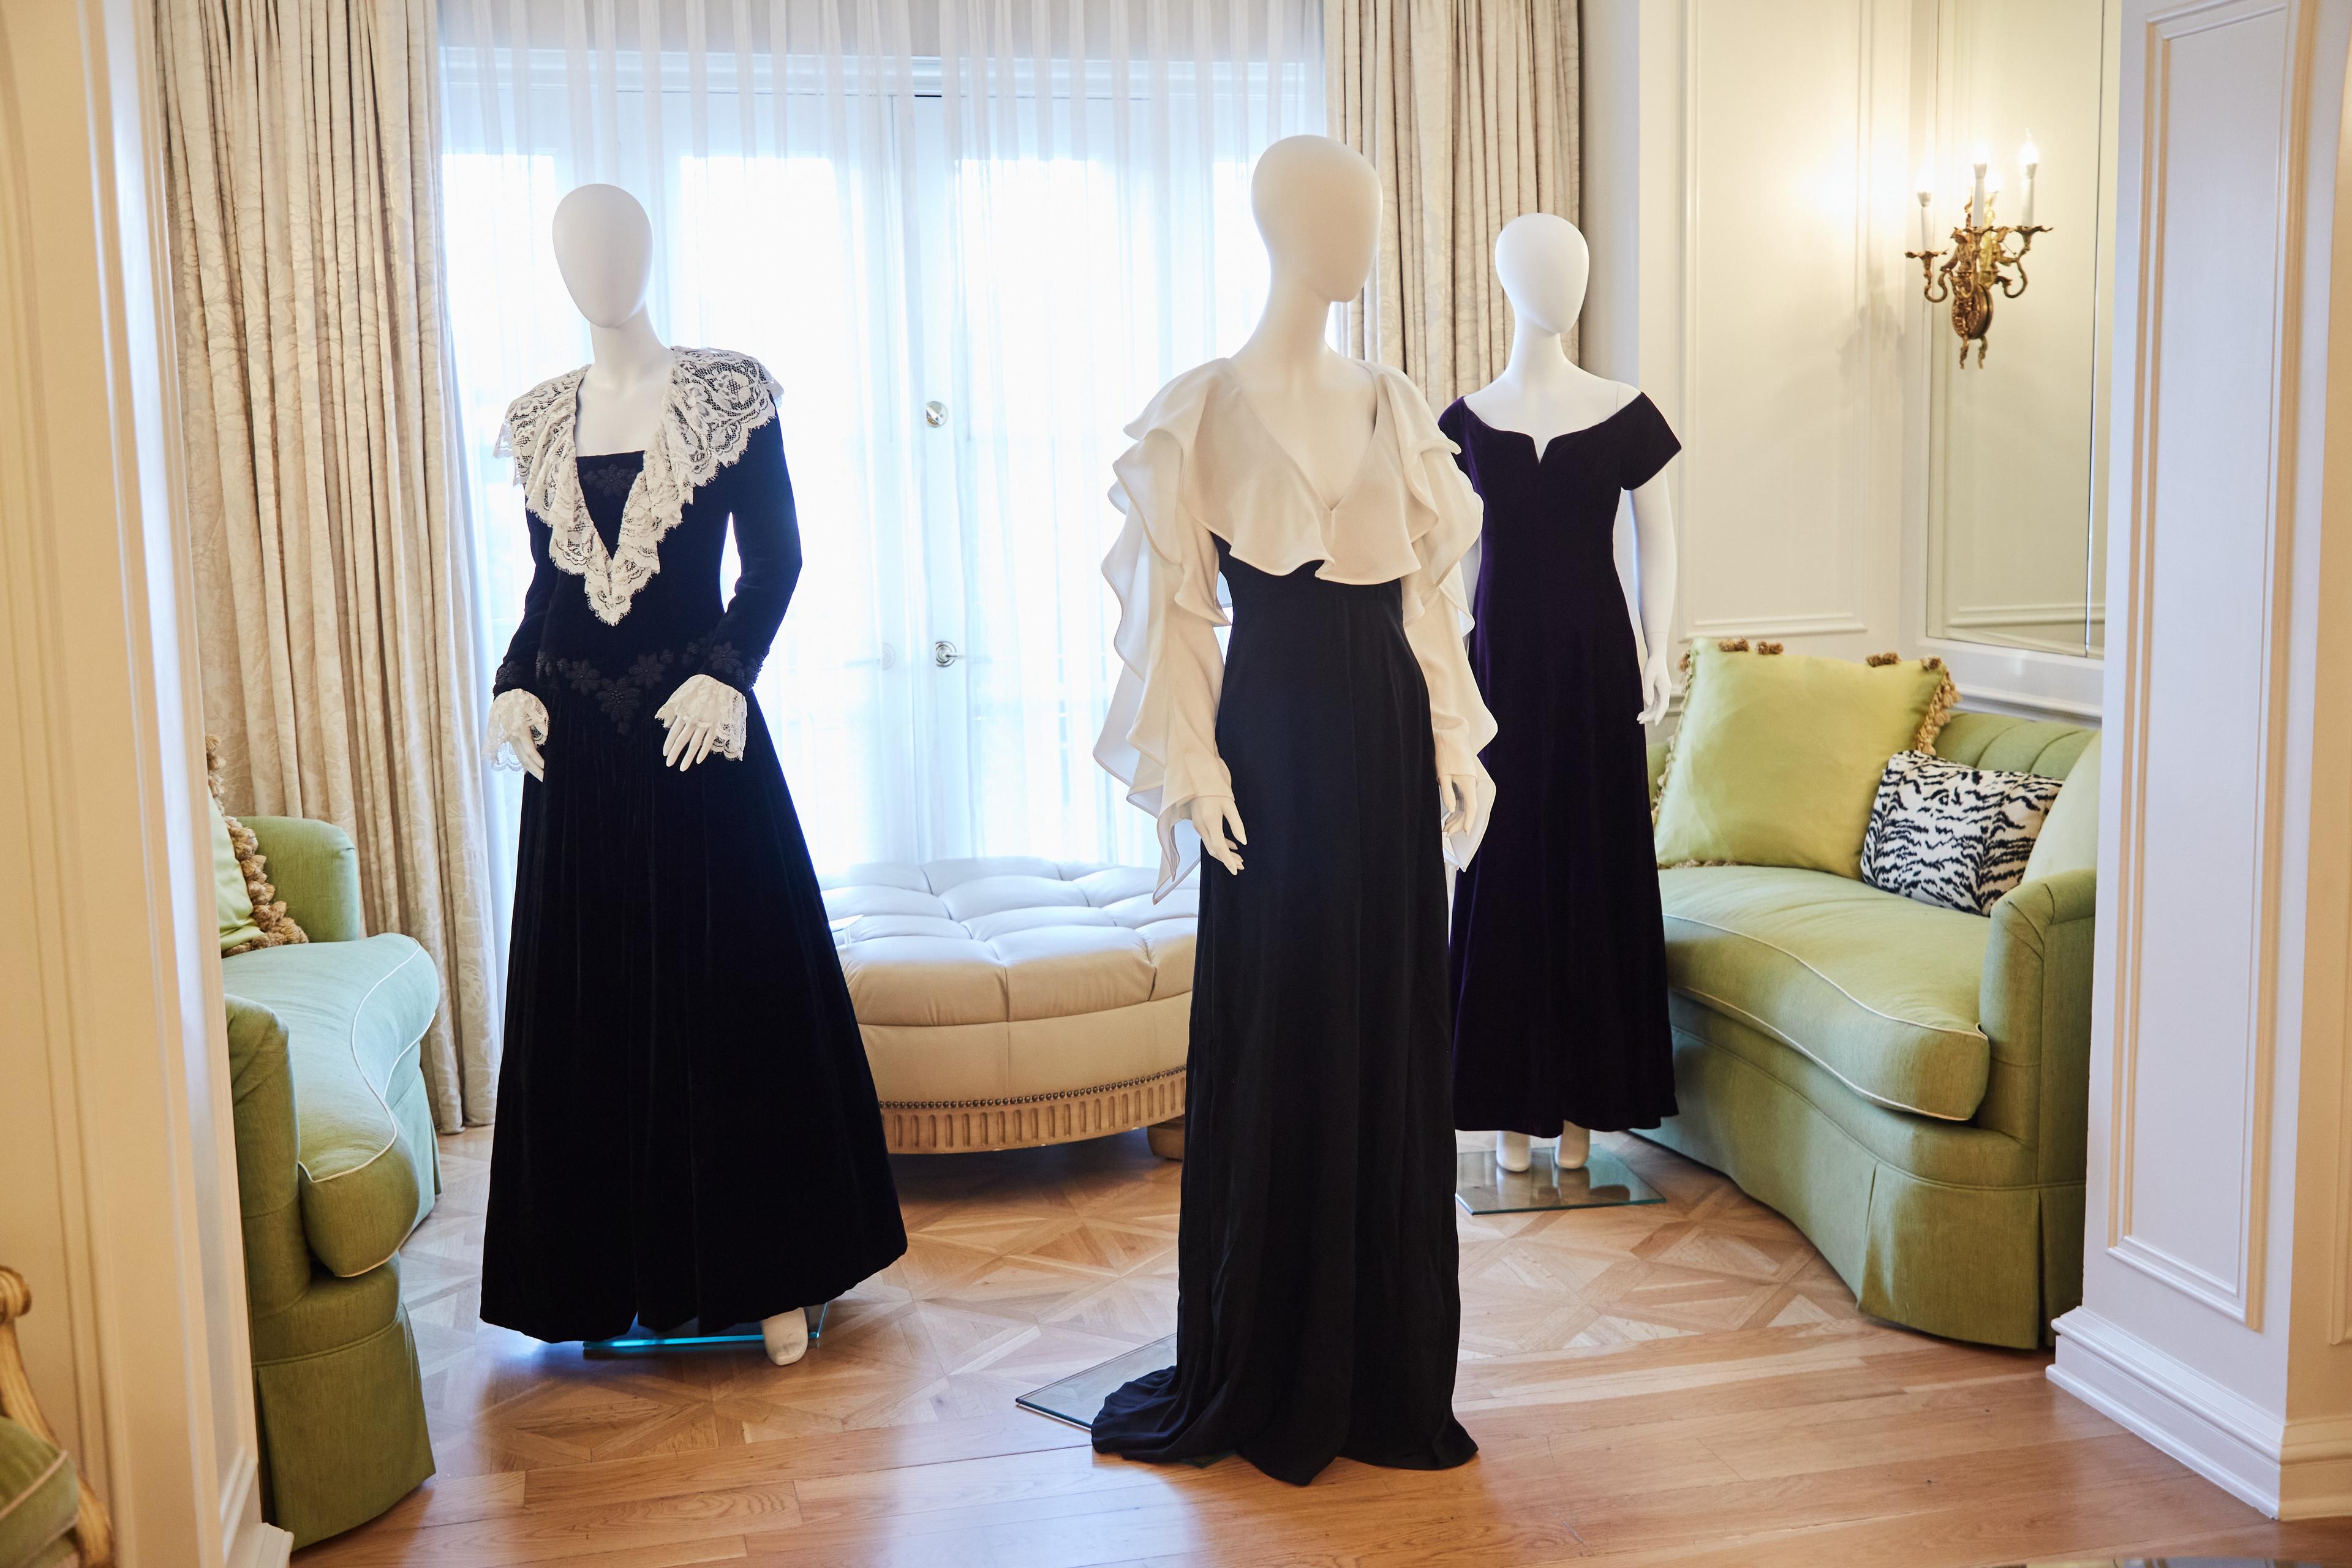 three mannequins wearing black dresses are standing next to each other in a living room .